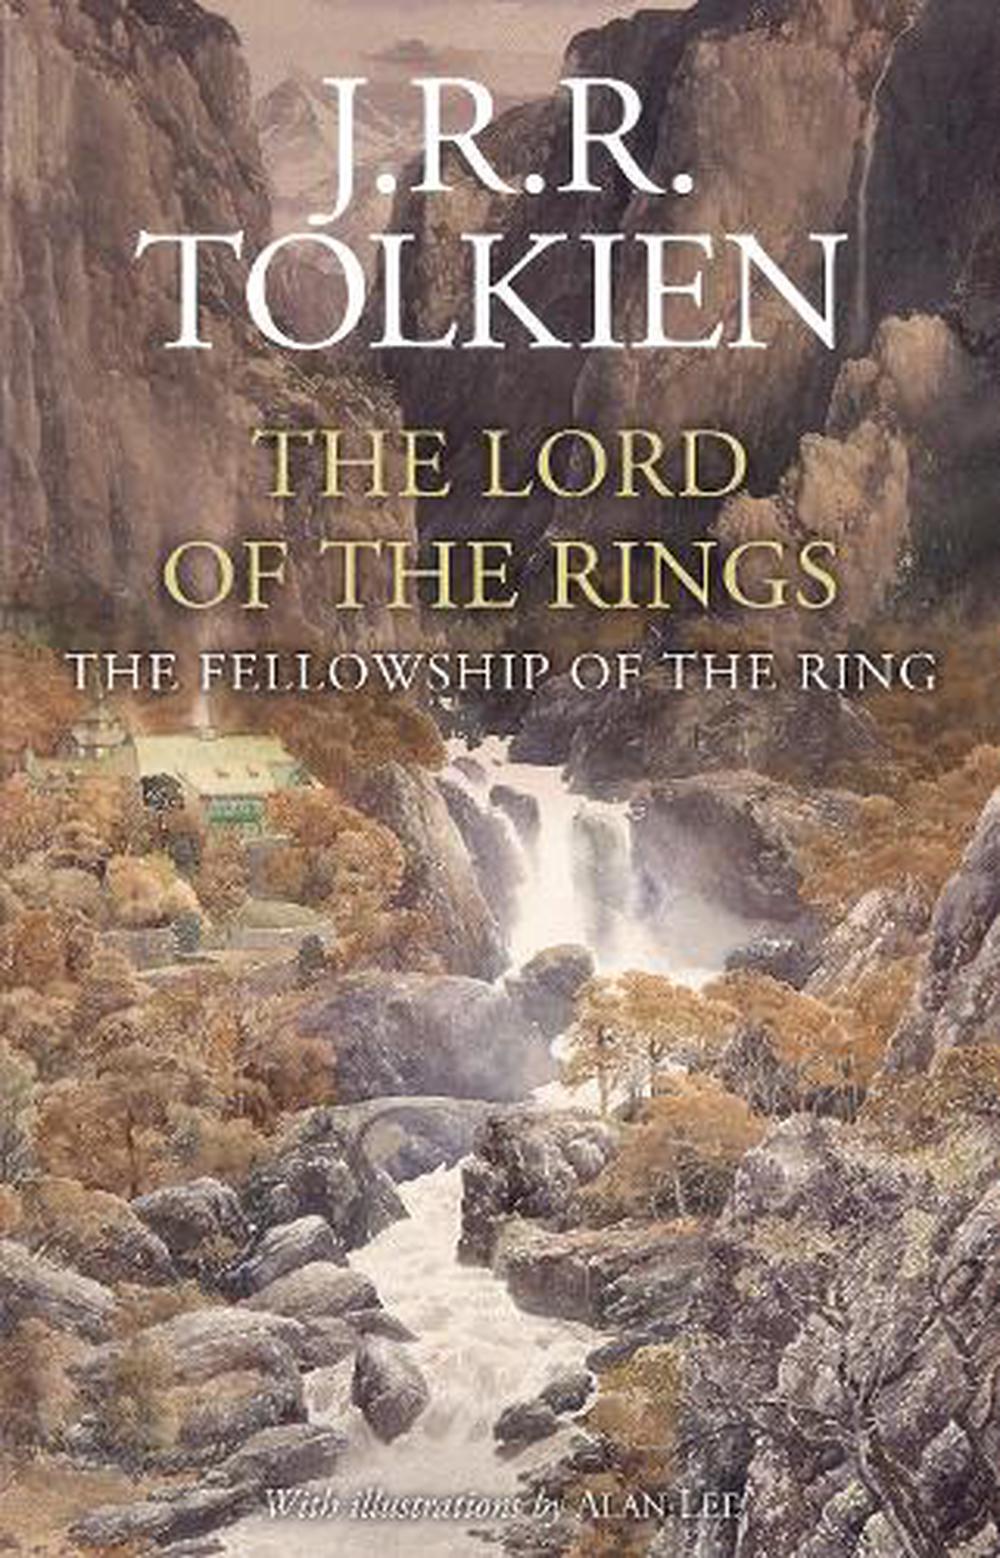 The Lord of the Rings: The Fellowship... download the new for apple